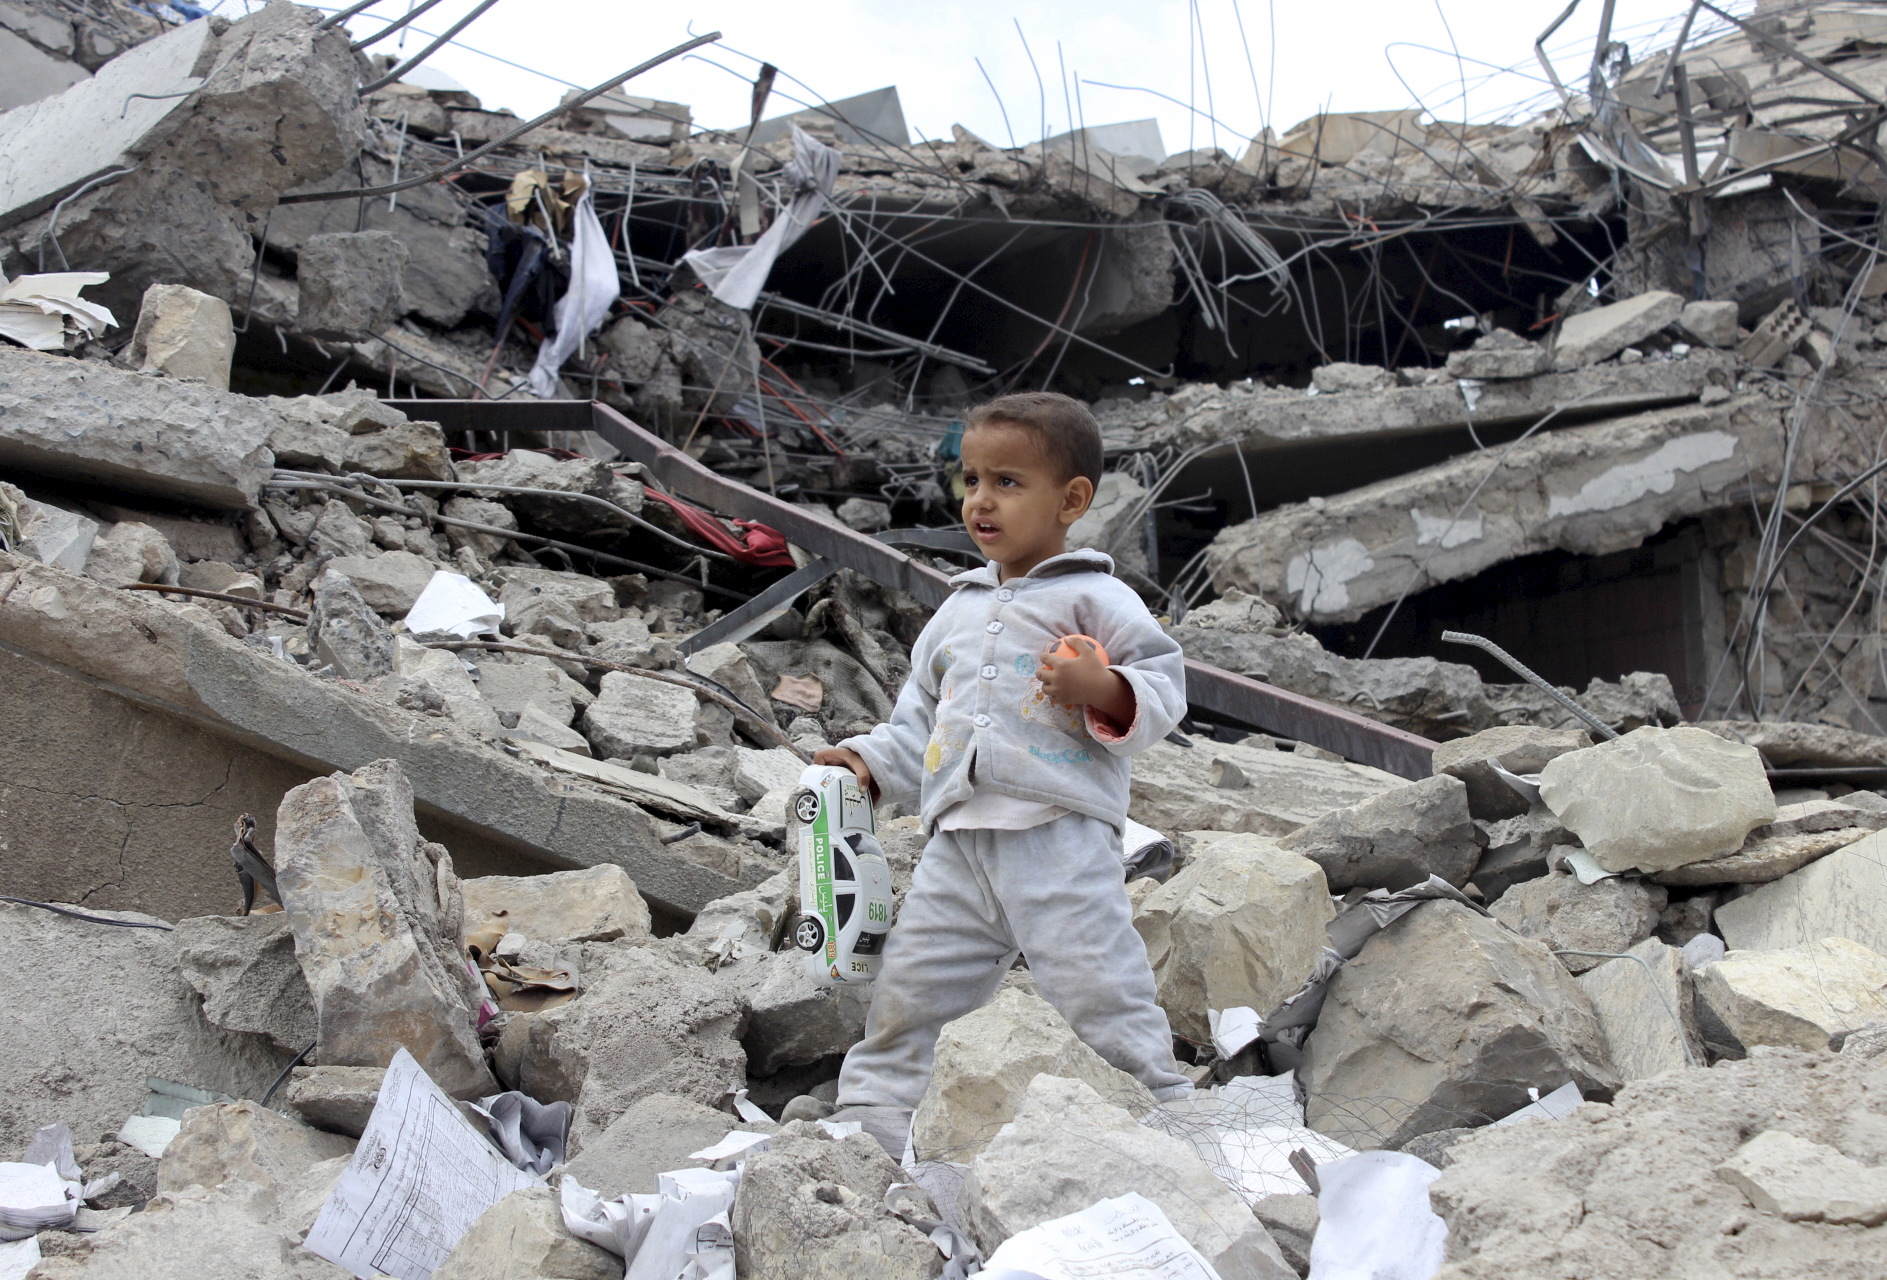 A boy collects toys in the rubble of a house destroyed by an airstrike in Yemen's northwestern city of Saada.